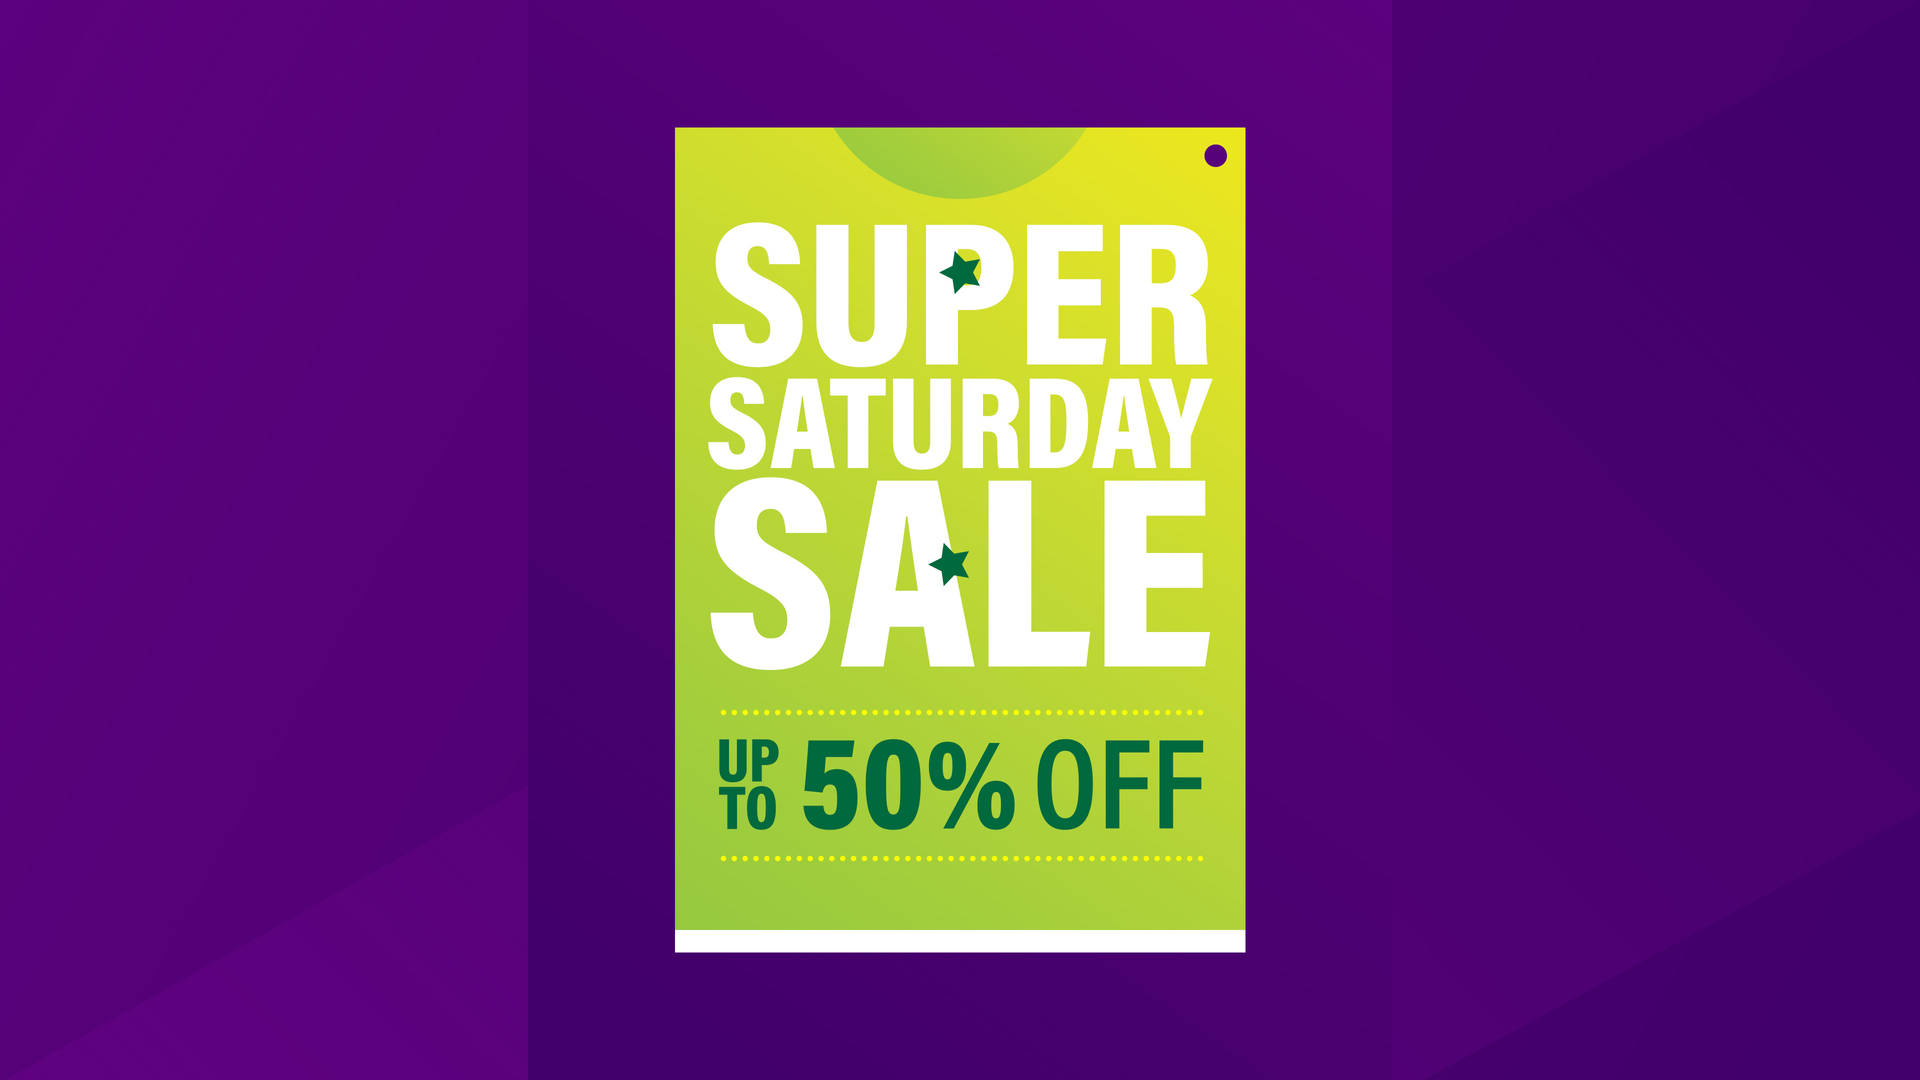 Exciting Super Saturday Sale Background